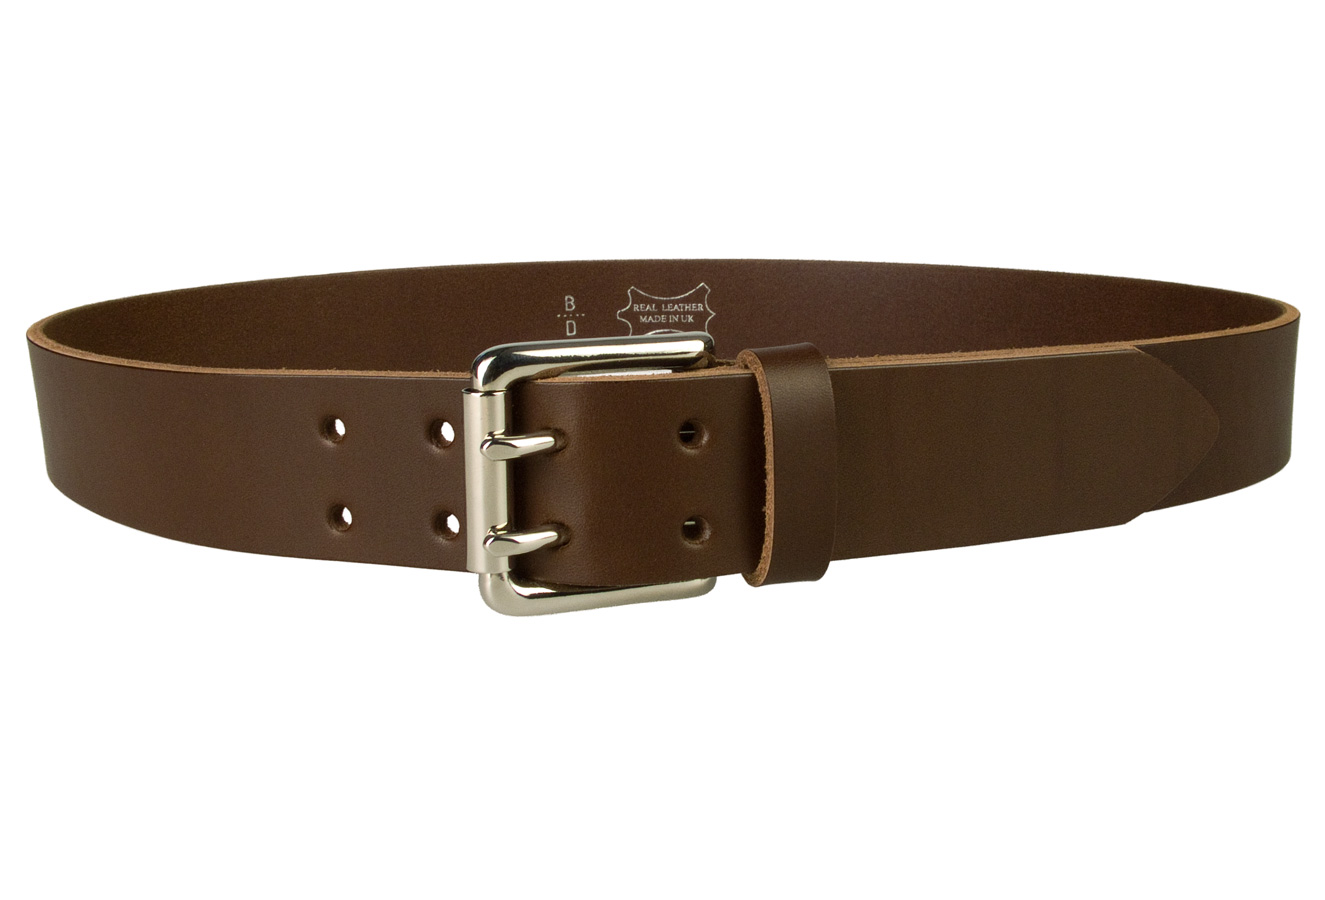 Leather Jeans Belt - Double Prong Roller Buckle - Brown - Front VIew ...